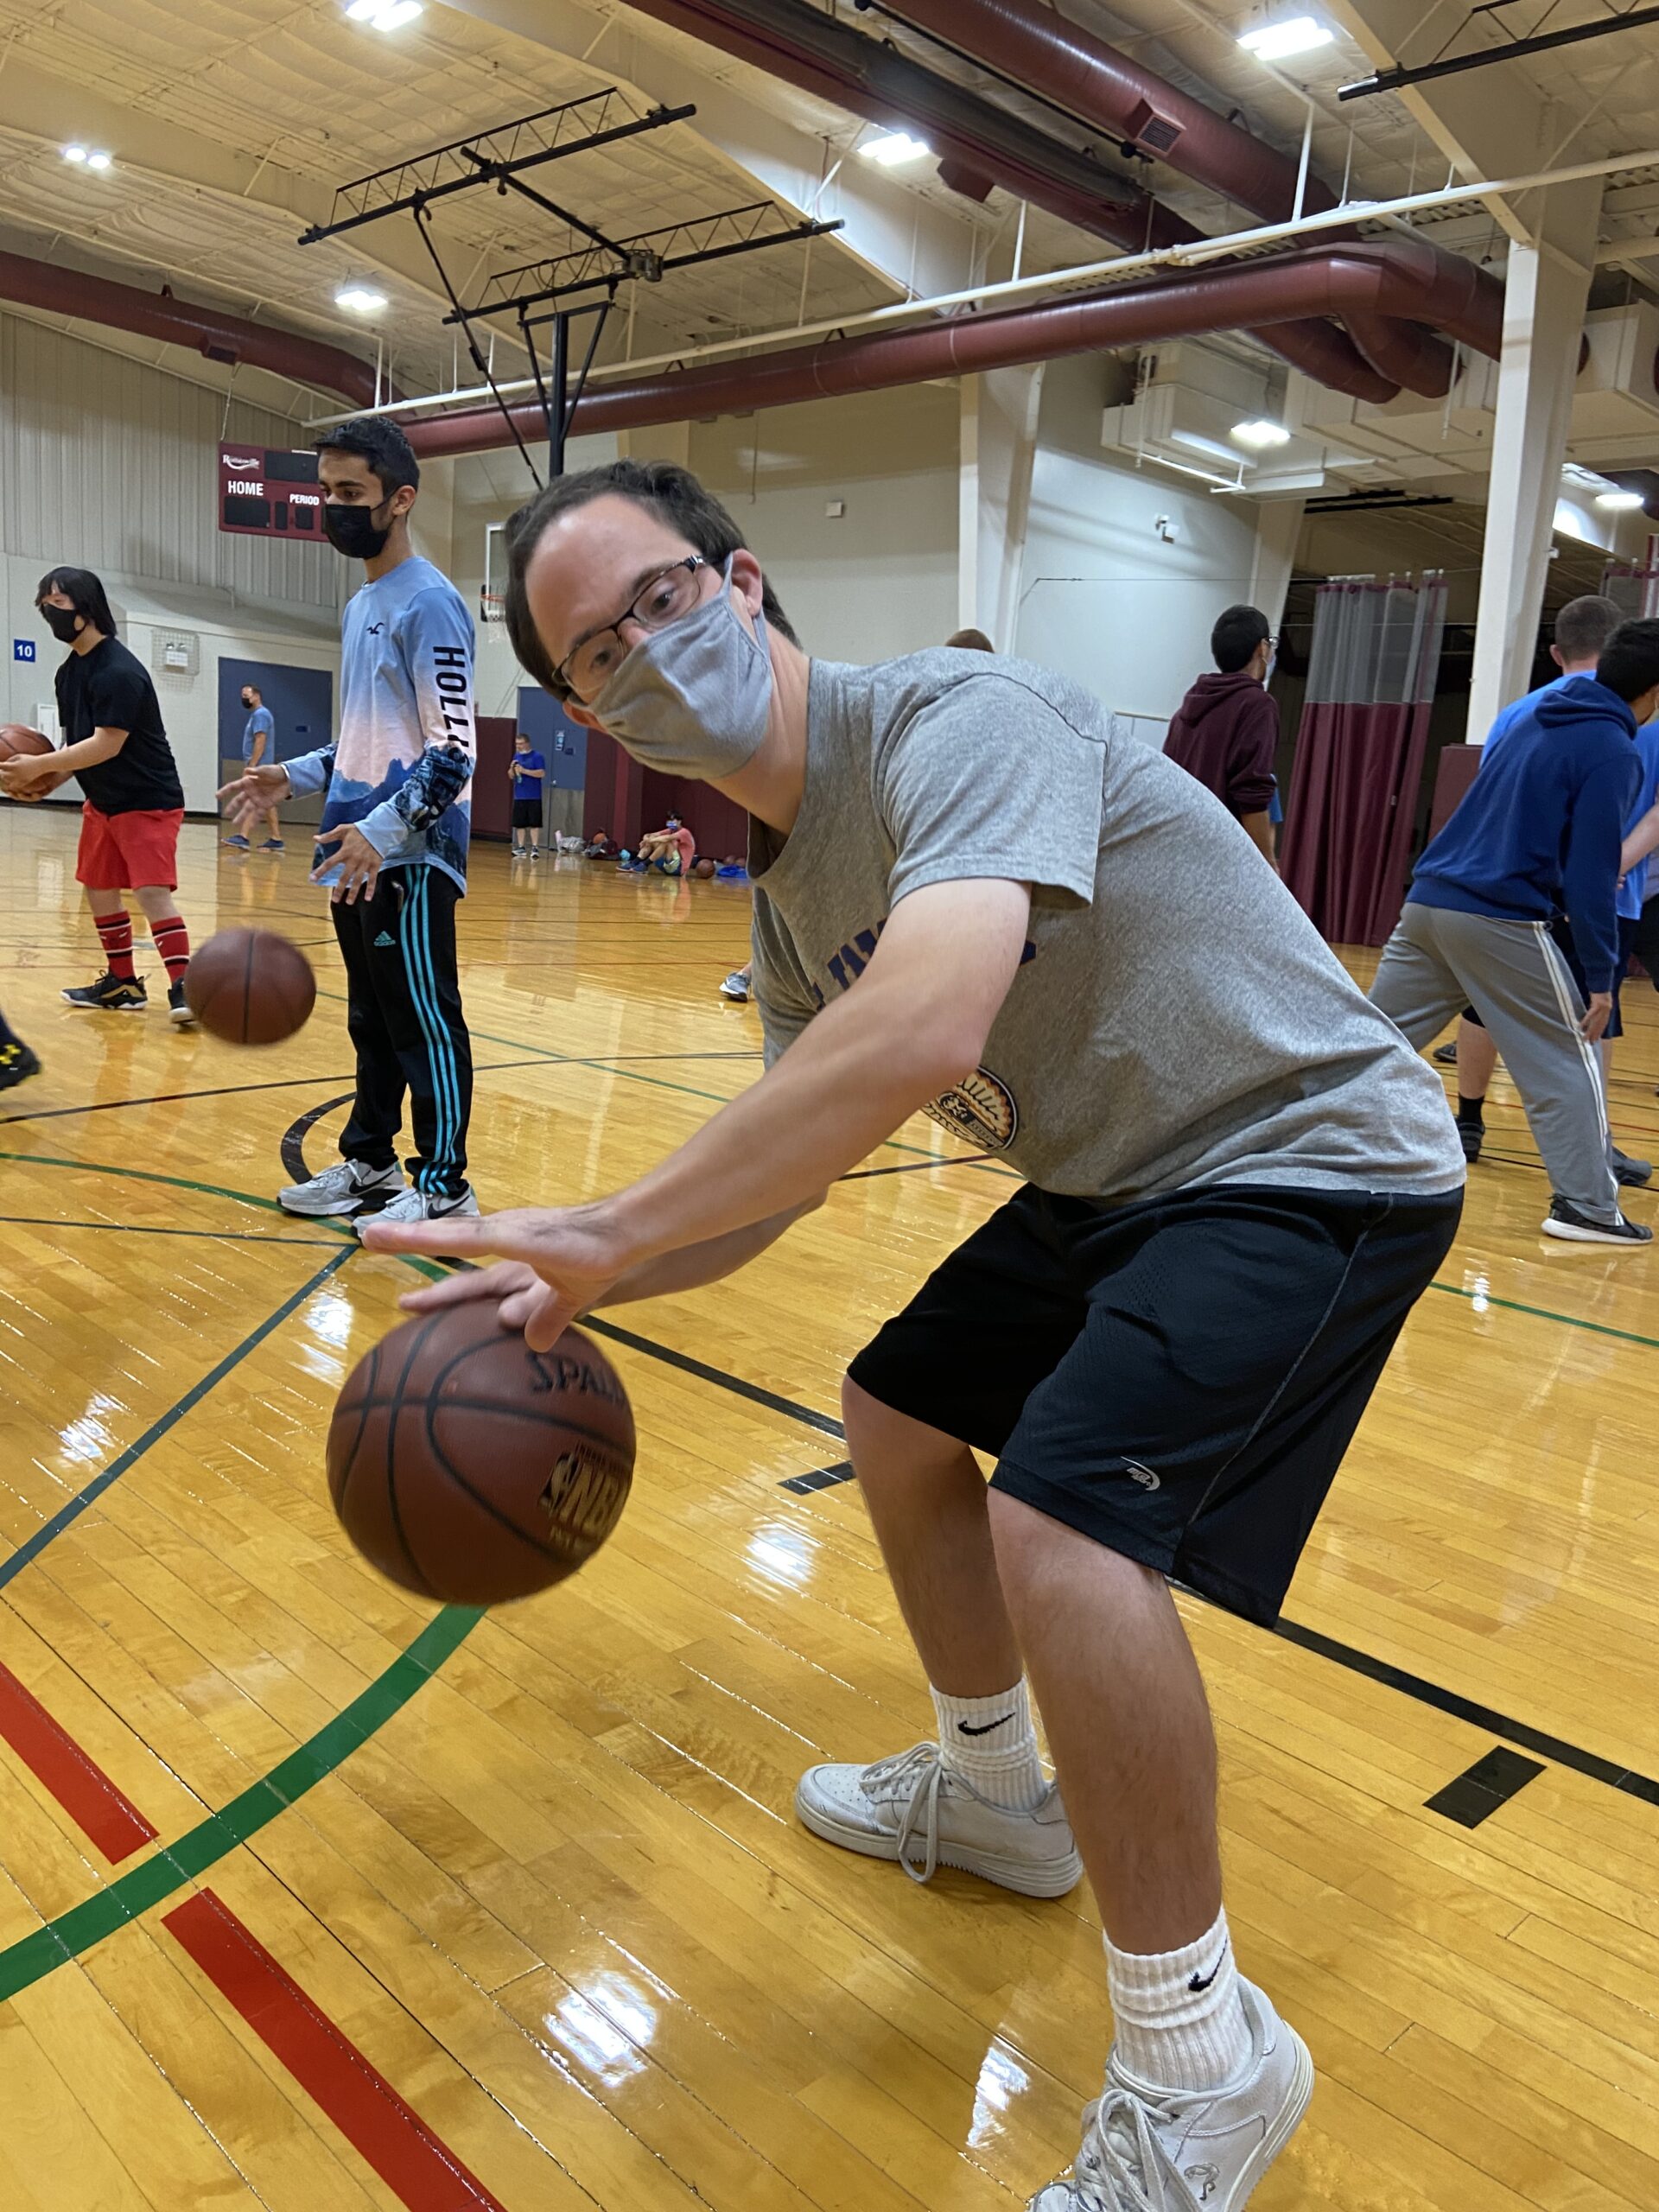 A man wearing a medical face mask dribbles a basketball on the court as he poses for the picture. There are several people in the background also playing basketball.